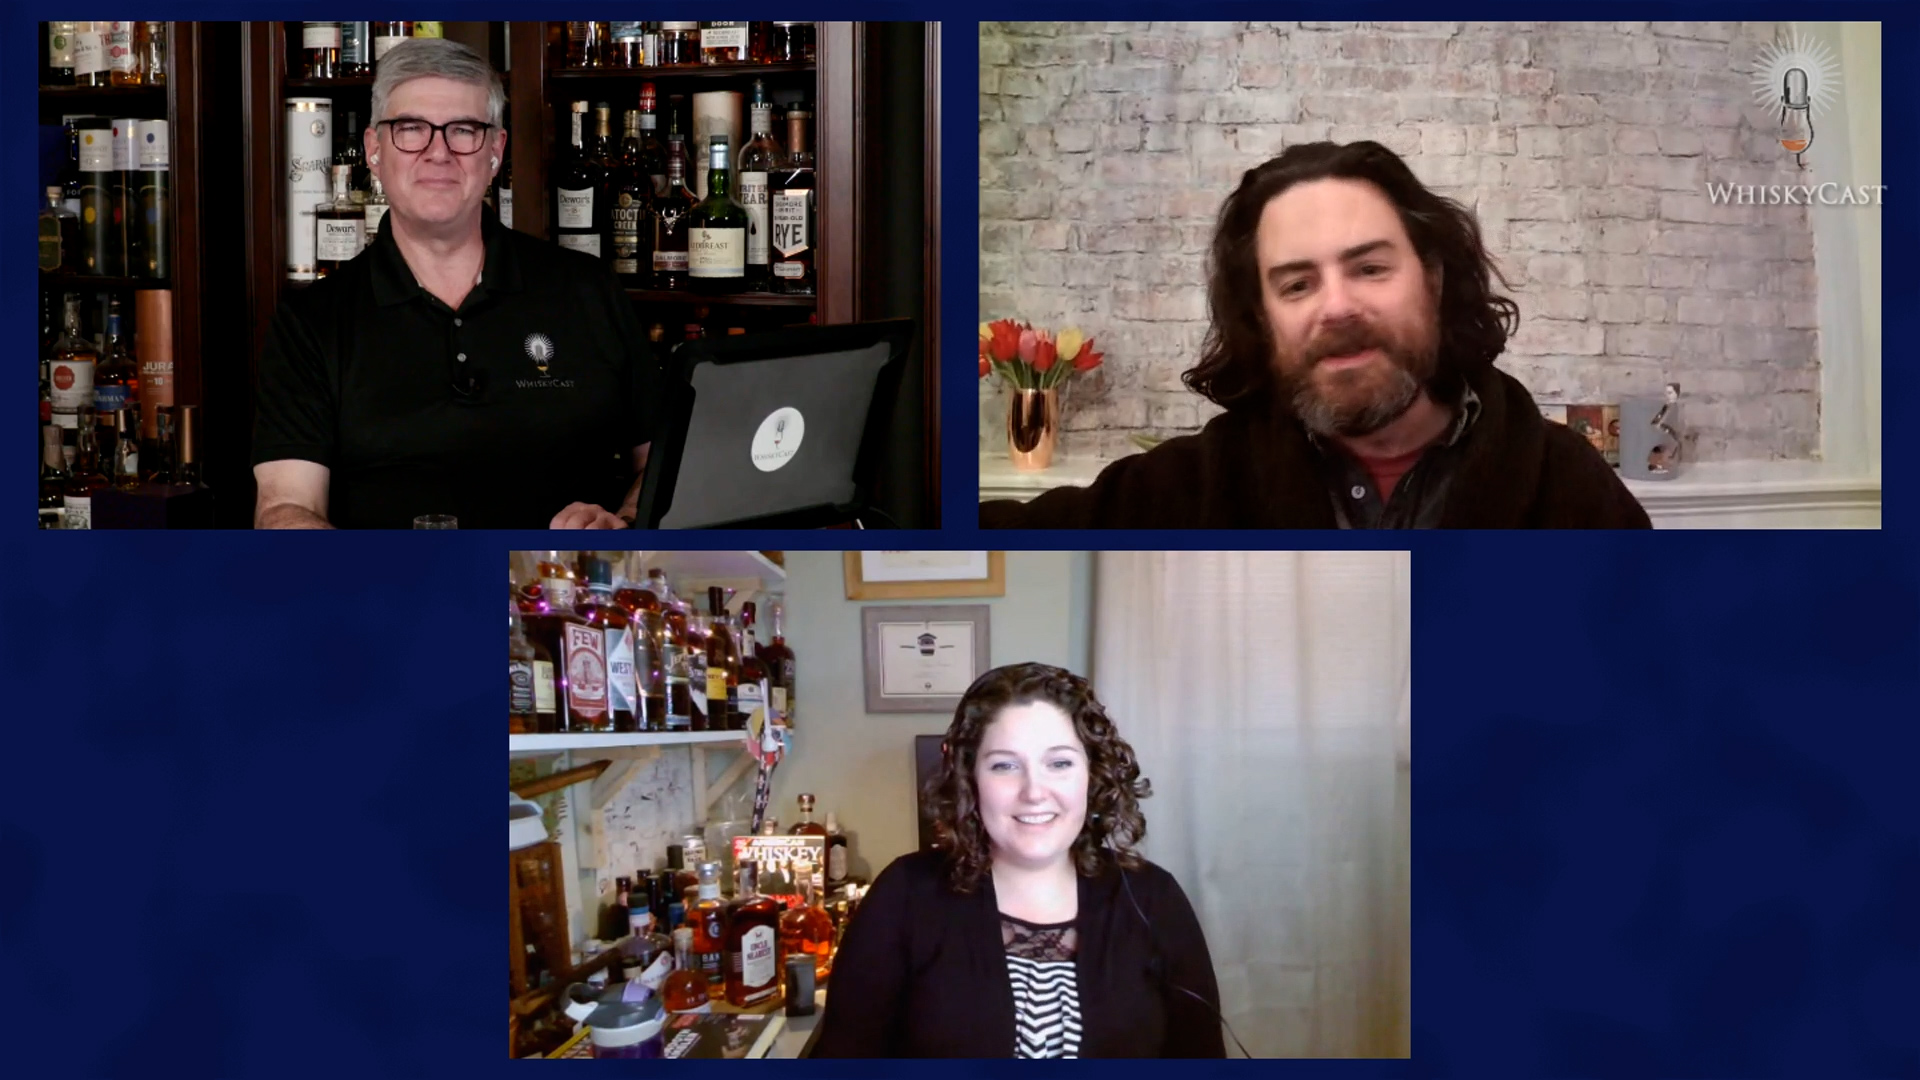 Clay Risen of The New York Times and Maggie Kimberl of American Whiskey Magazine joined us on Friday night's webcast. The on-demand replay is available now, and listen for the podcast version later this week.